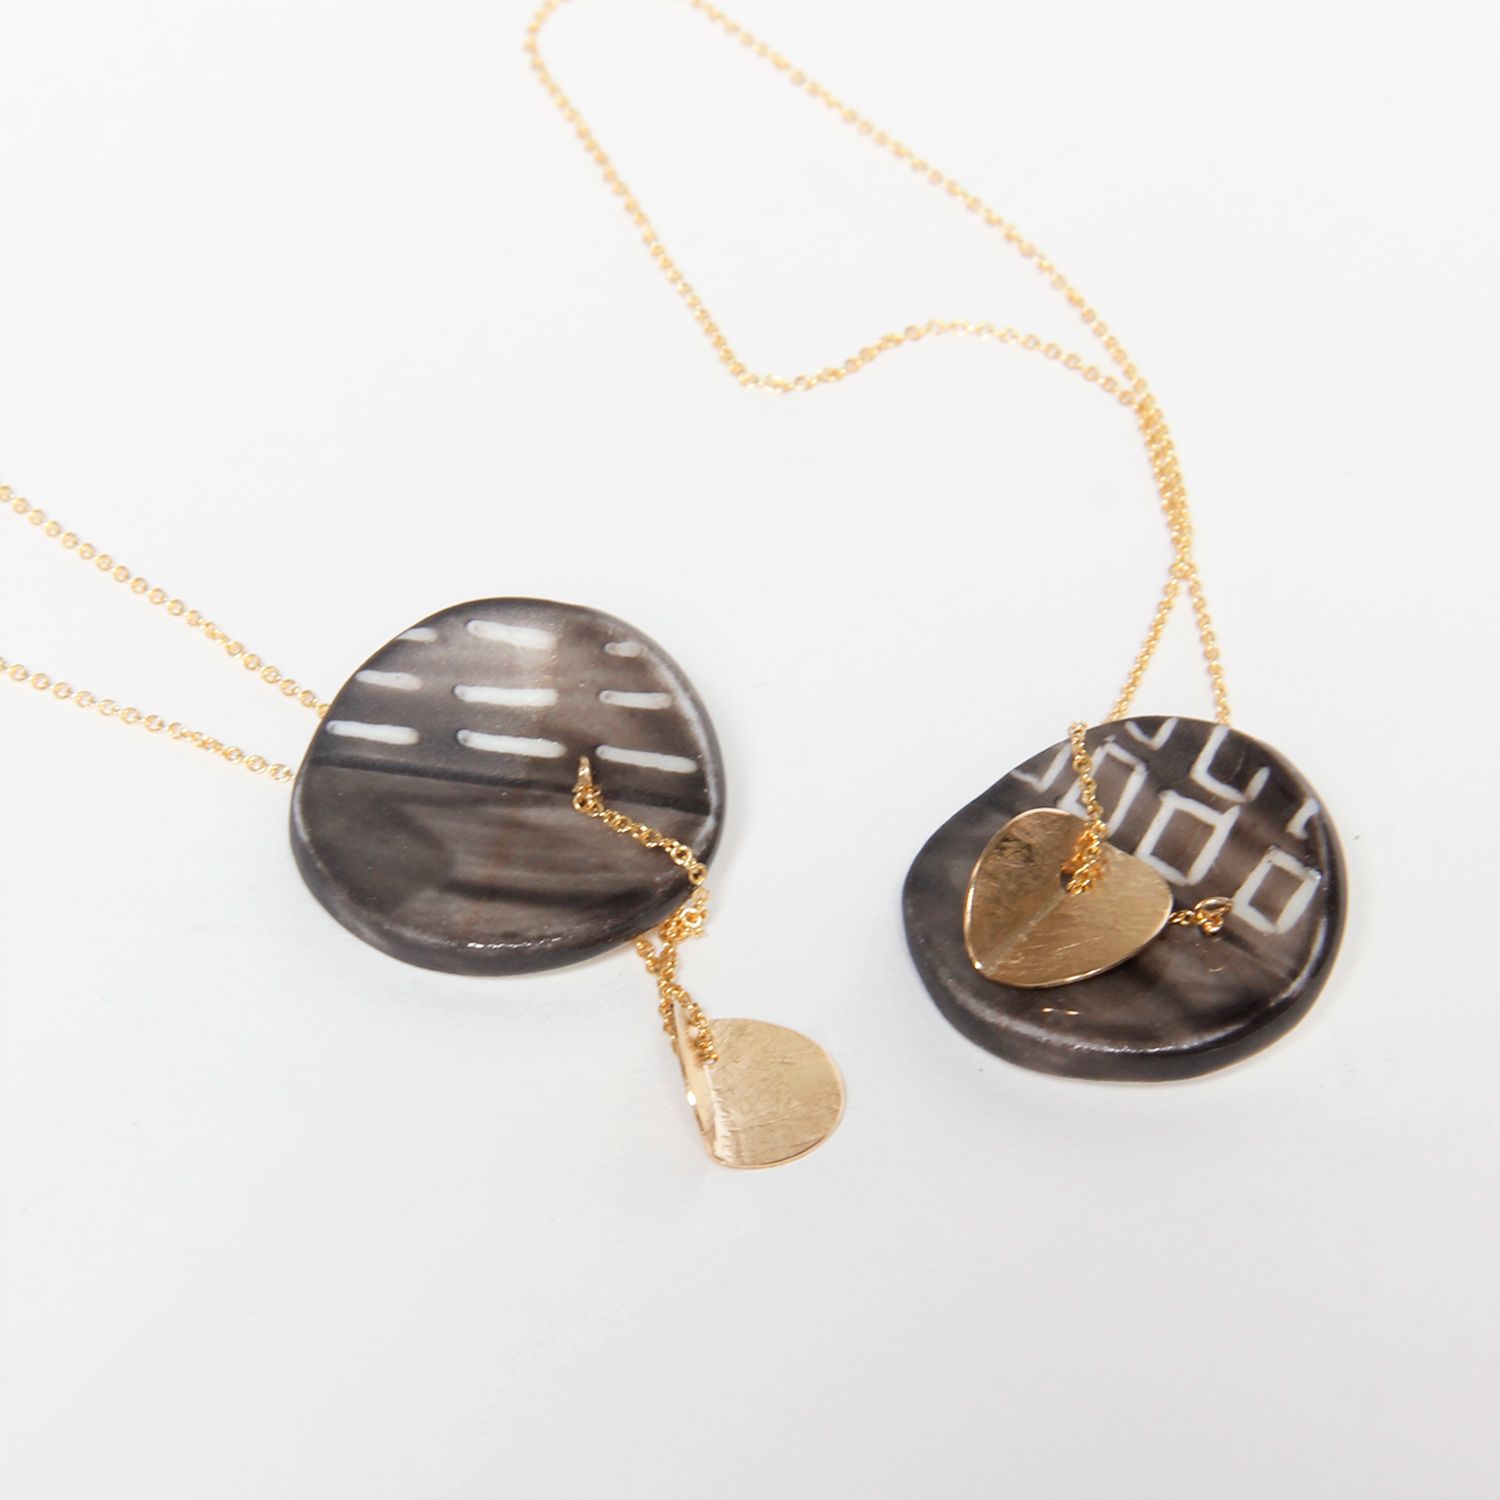 Chayle Jewellery: Eucalyptus Porcelain Large Double Pendant Black Wash Yellow Gold-Fill Product Image 2 of 4